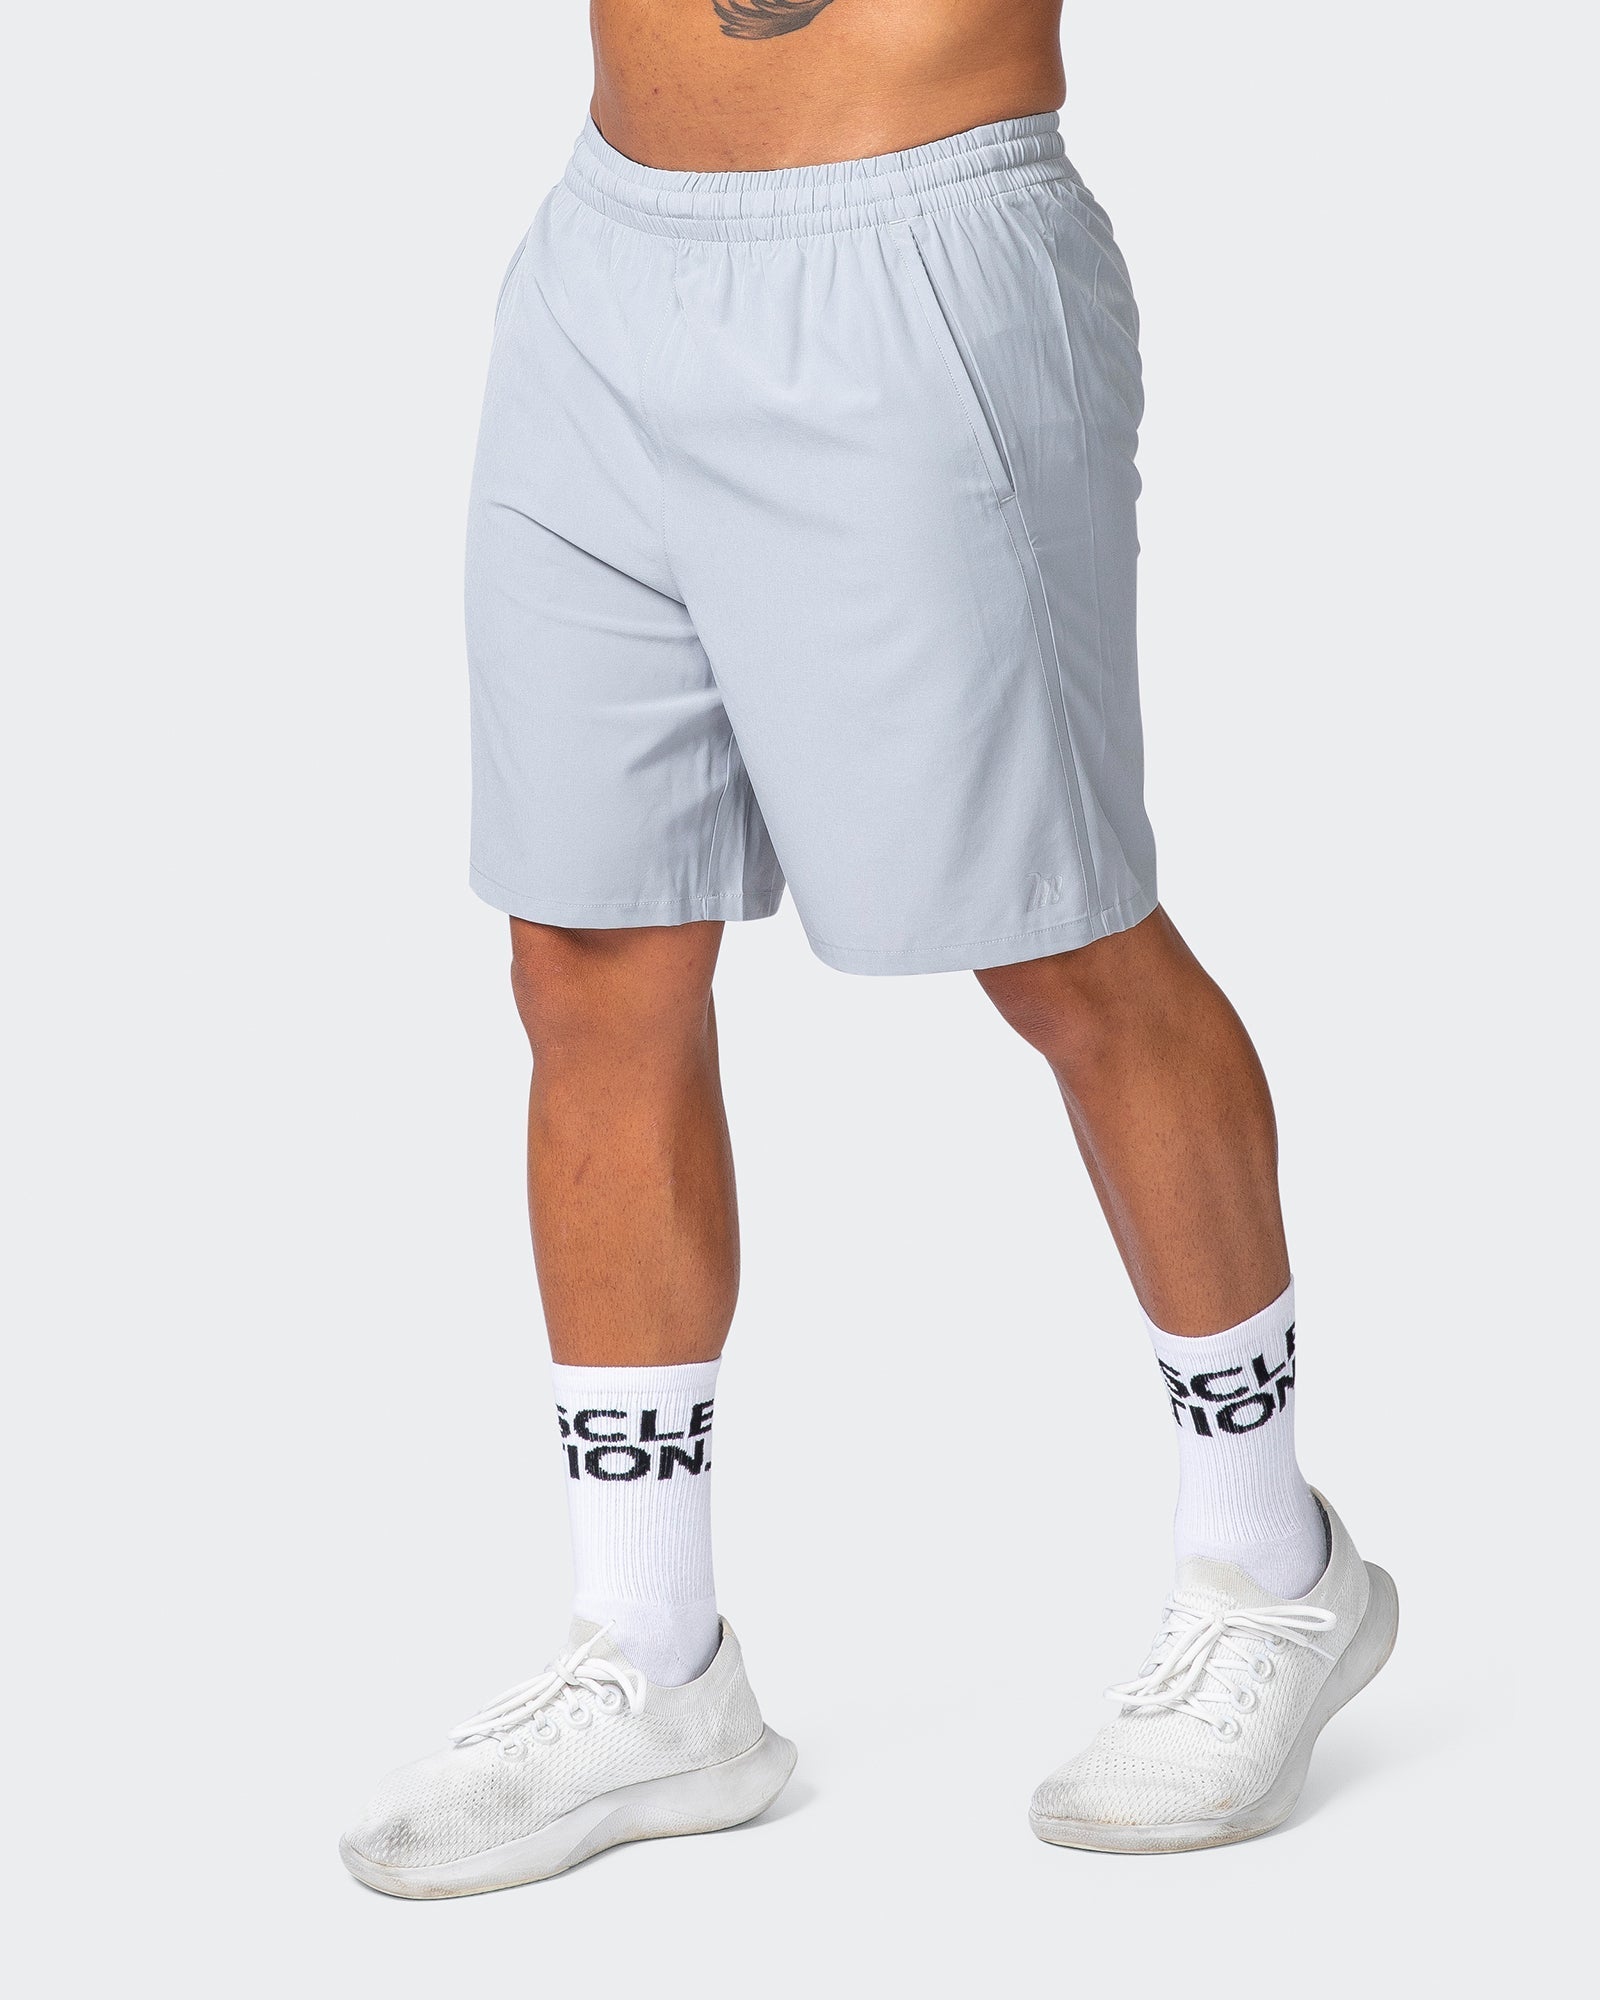 musclenation NEW HEIGHTS 7" SHORTS Quiet Grey